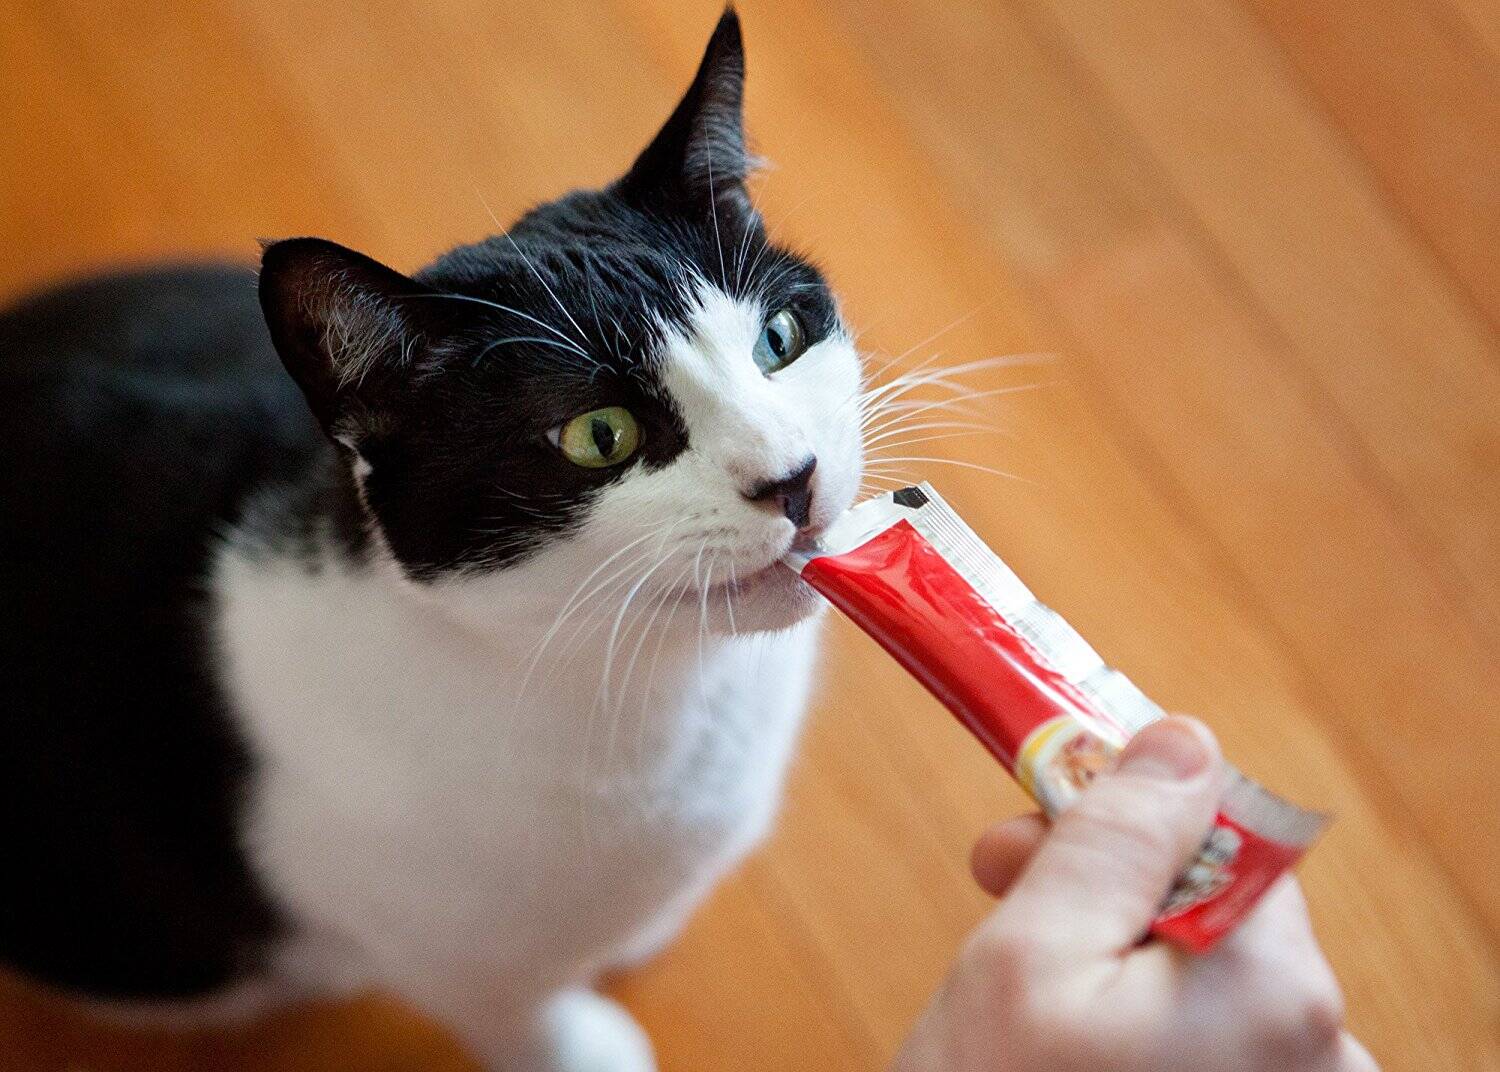 Yogurt Squeeze Pops For Cats - //coolthings.us